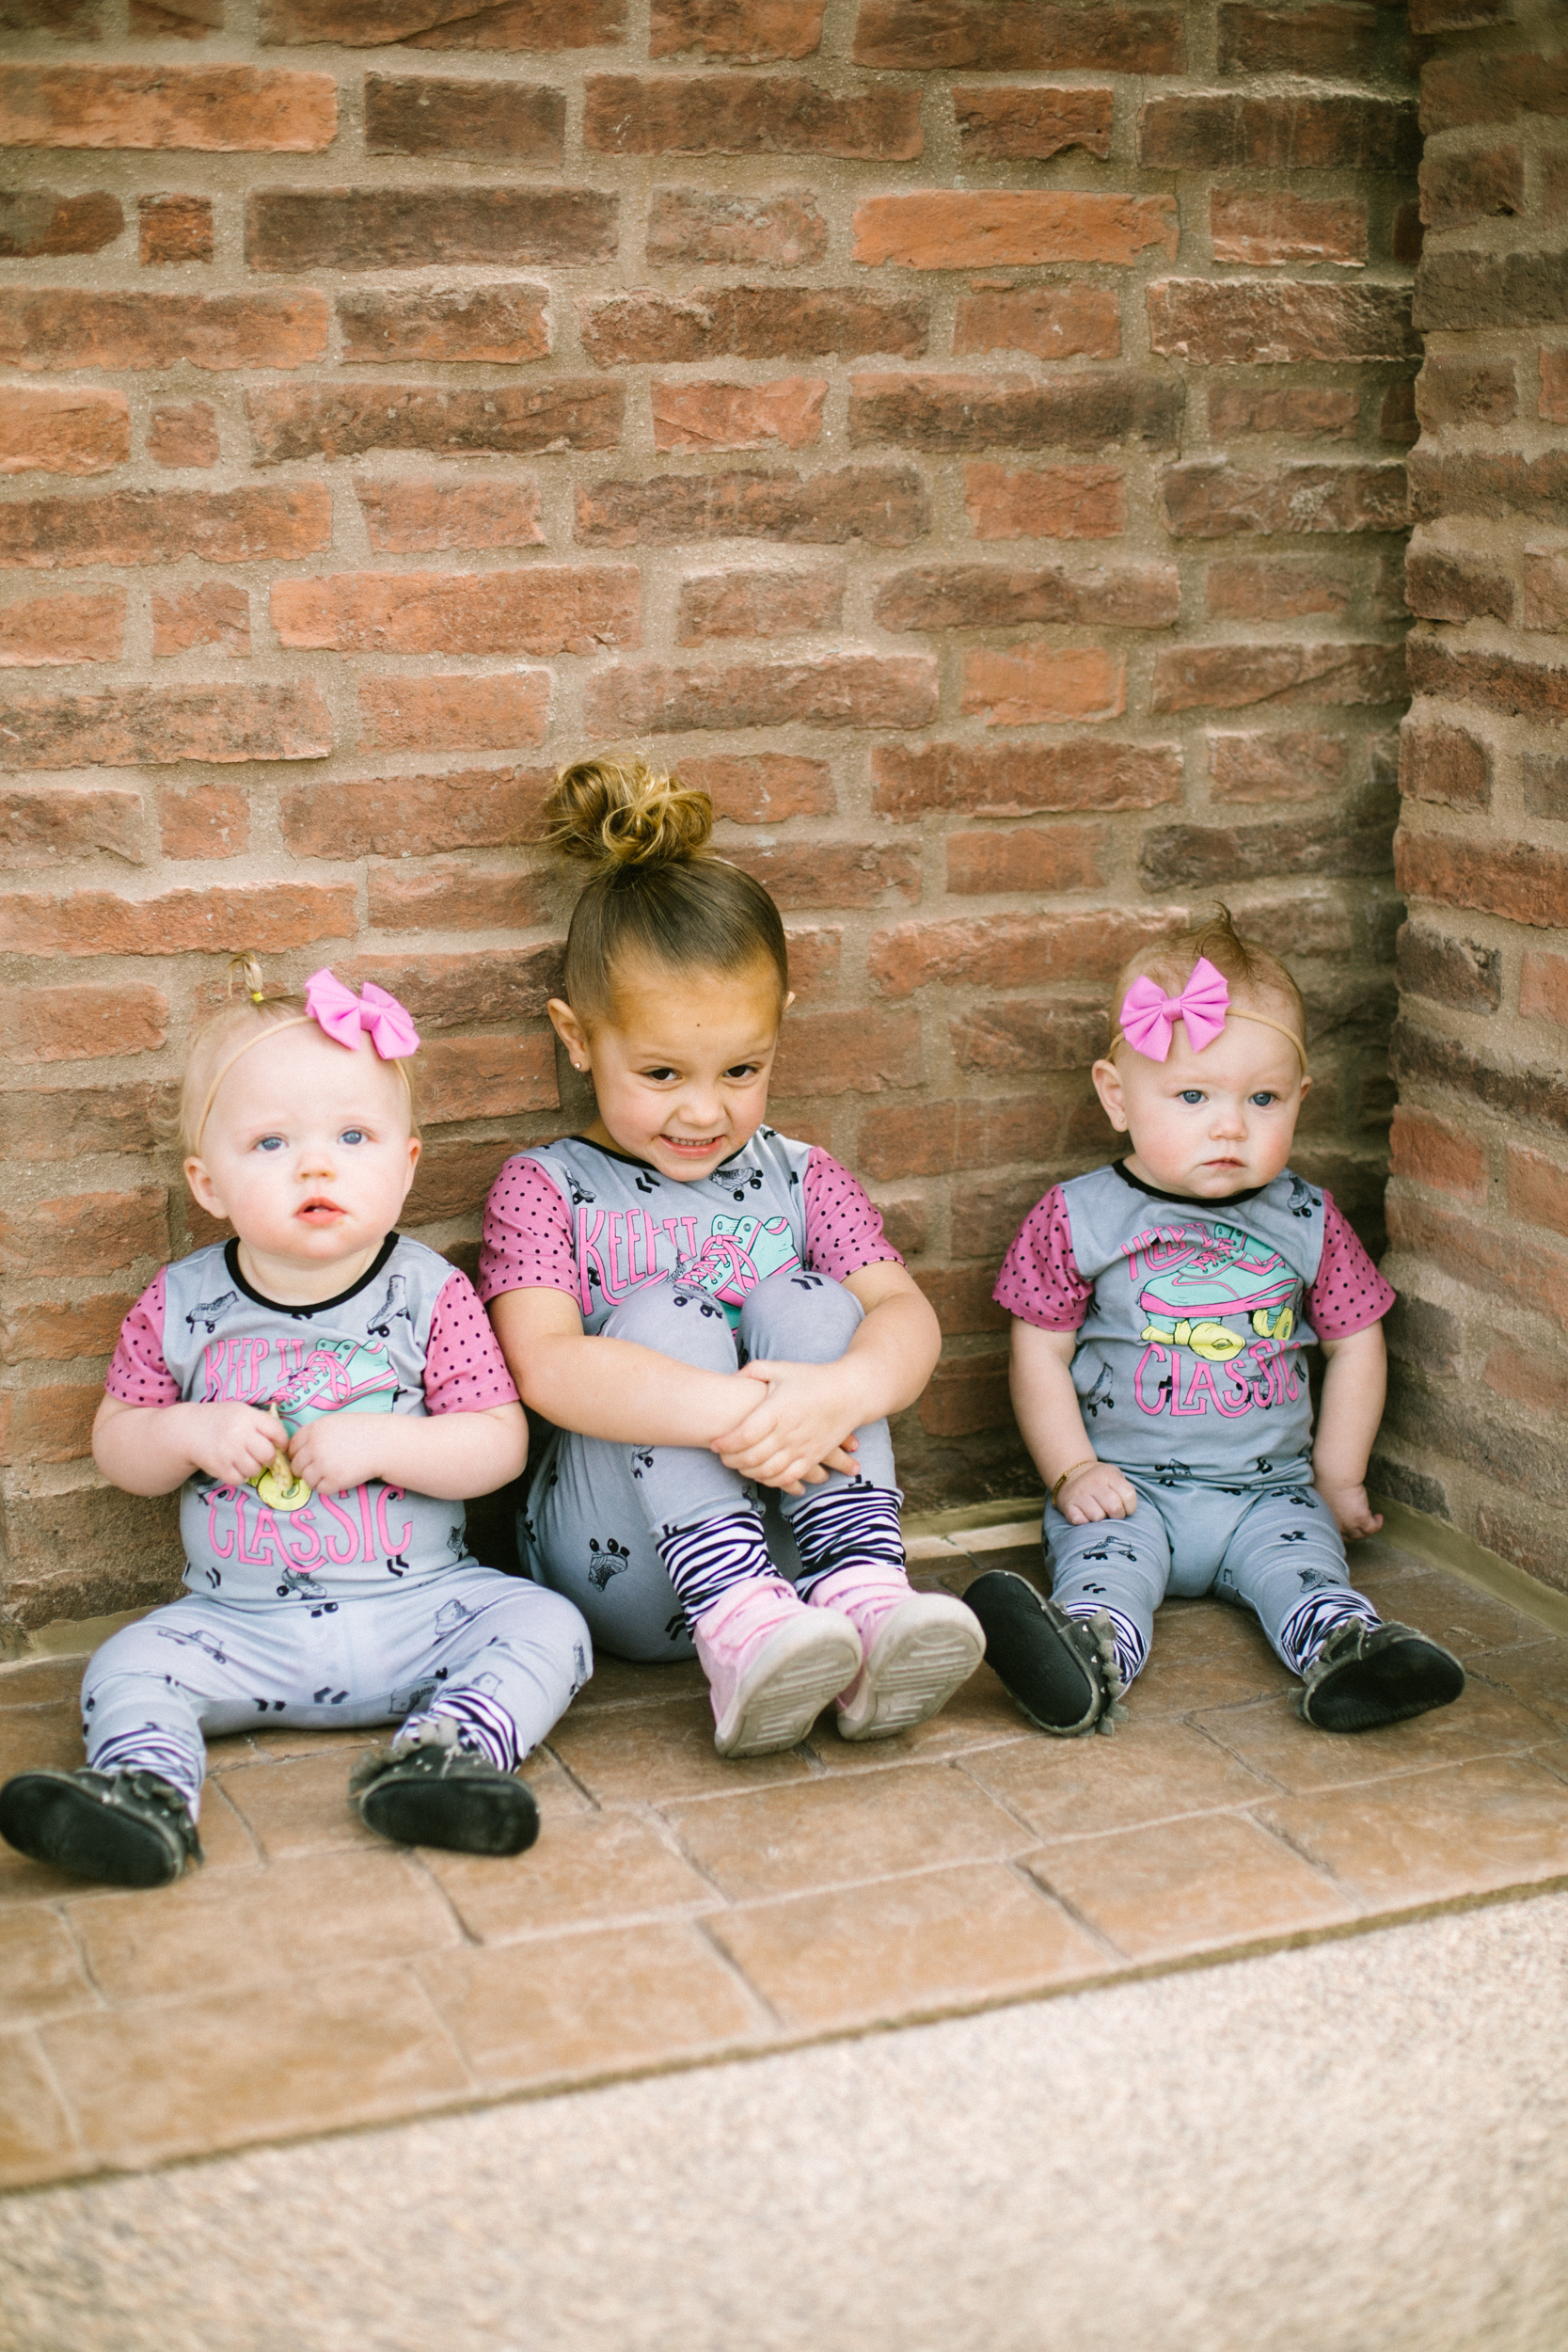 Little Girl Fashion: Spring/Summer Trends by popular Las Vegas style blogger Life of a Sister